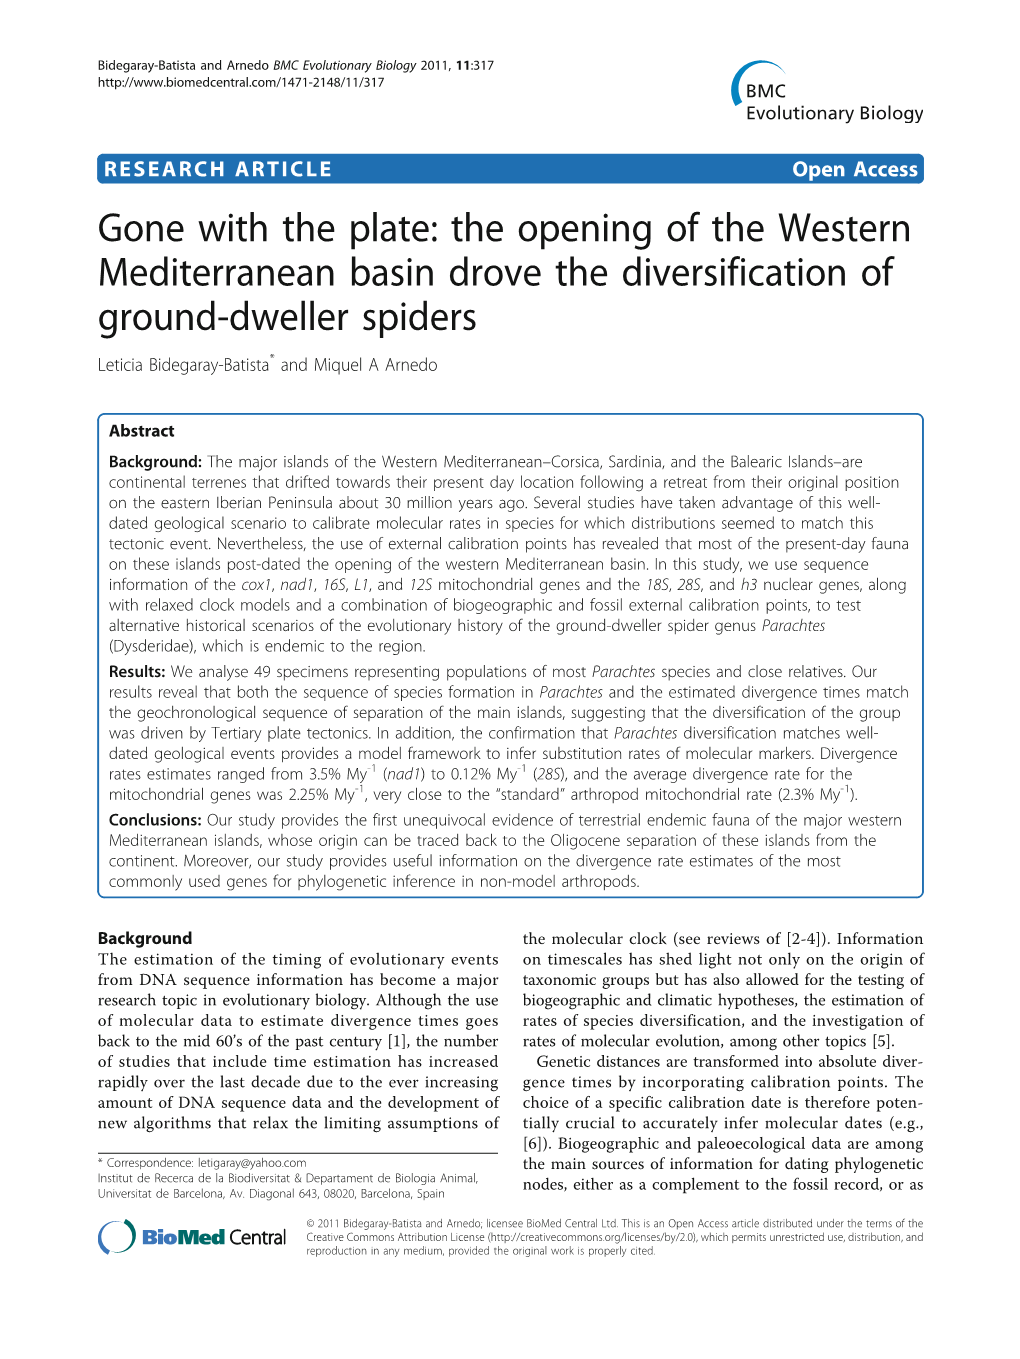 Gone with the Plate: the Opening of the Western Mediterranean Basin Drove the Diversification of Ground-Dweller Spiders Leticia Bidegaray-Batista* and Miquel a Arnedo